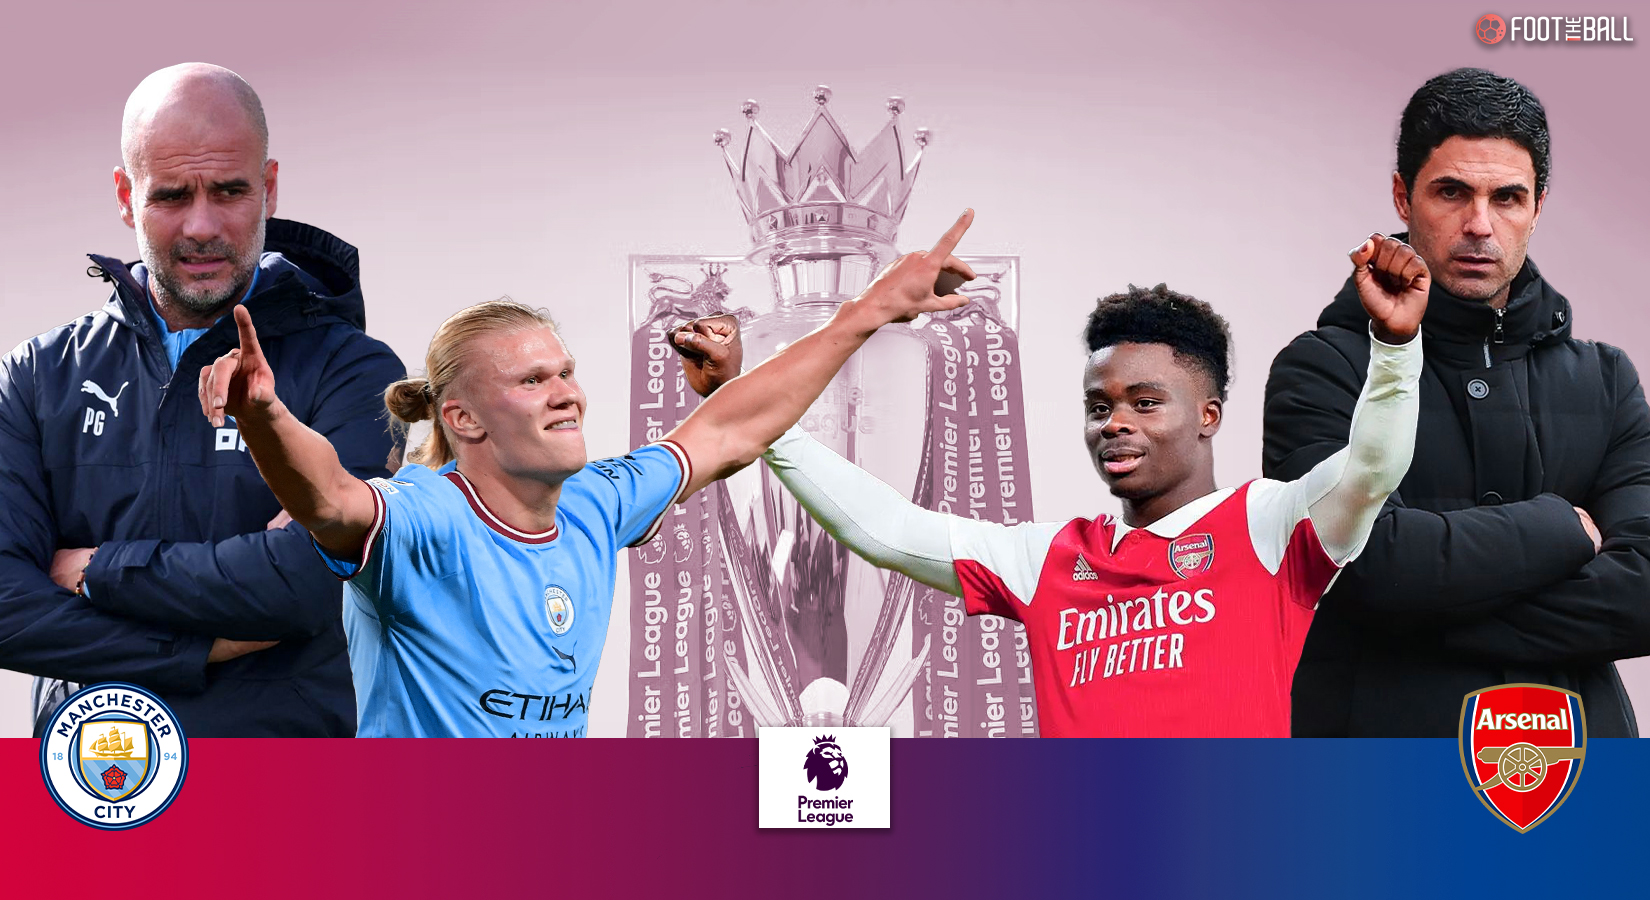 THE TITLE RACE IS ON!, Arsenal v Man City